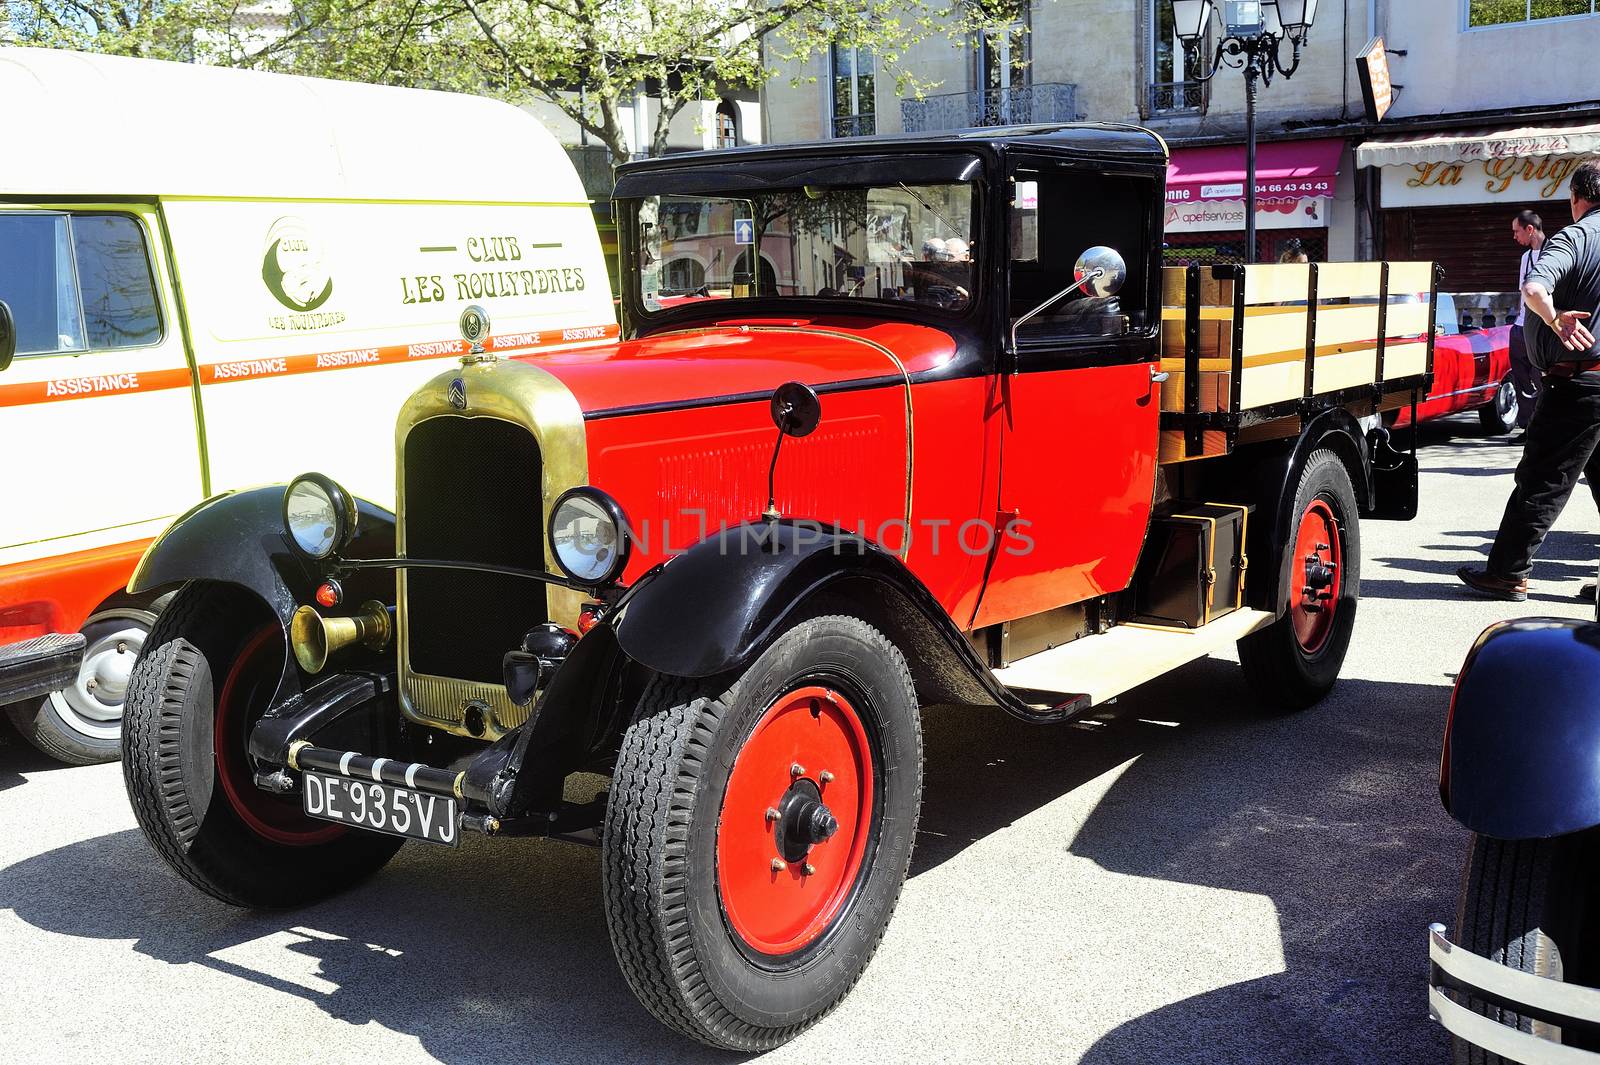 old Citroen car from the 1920s by gillespaire